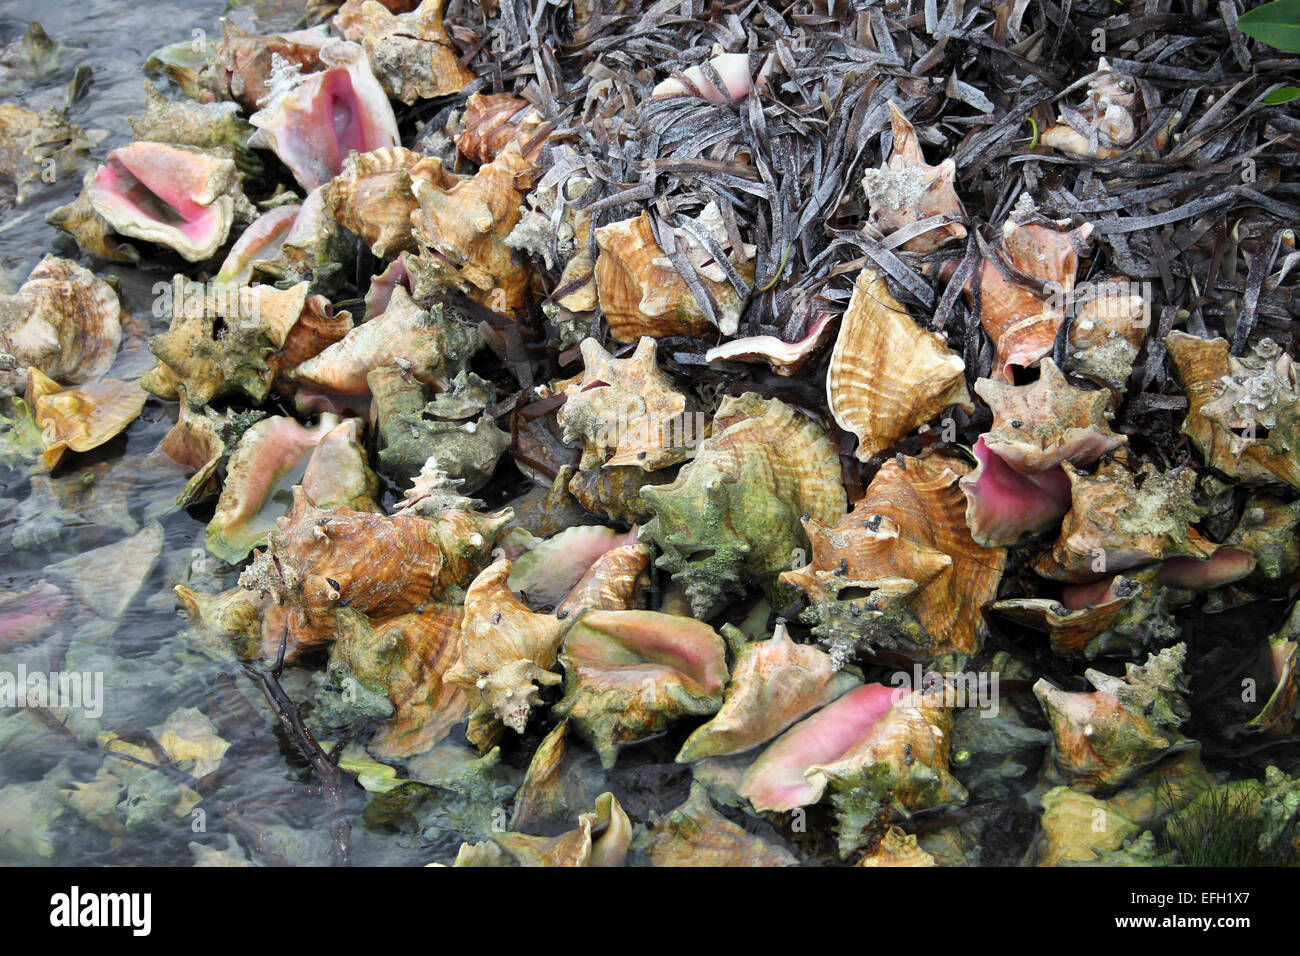 Queen Conch Shells discarded after their flesh was taken for human consumption Stock Photo